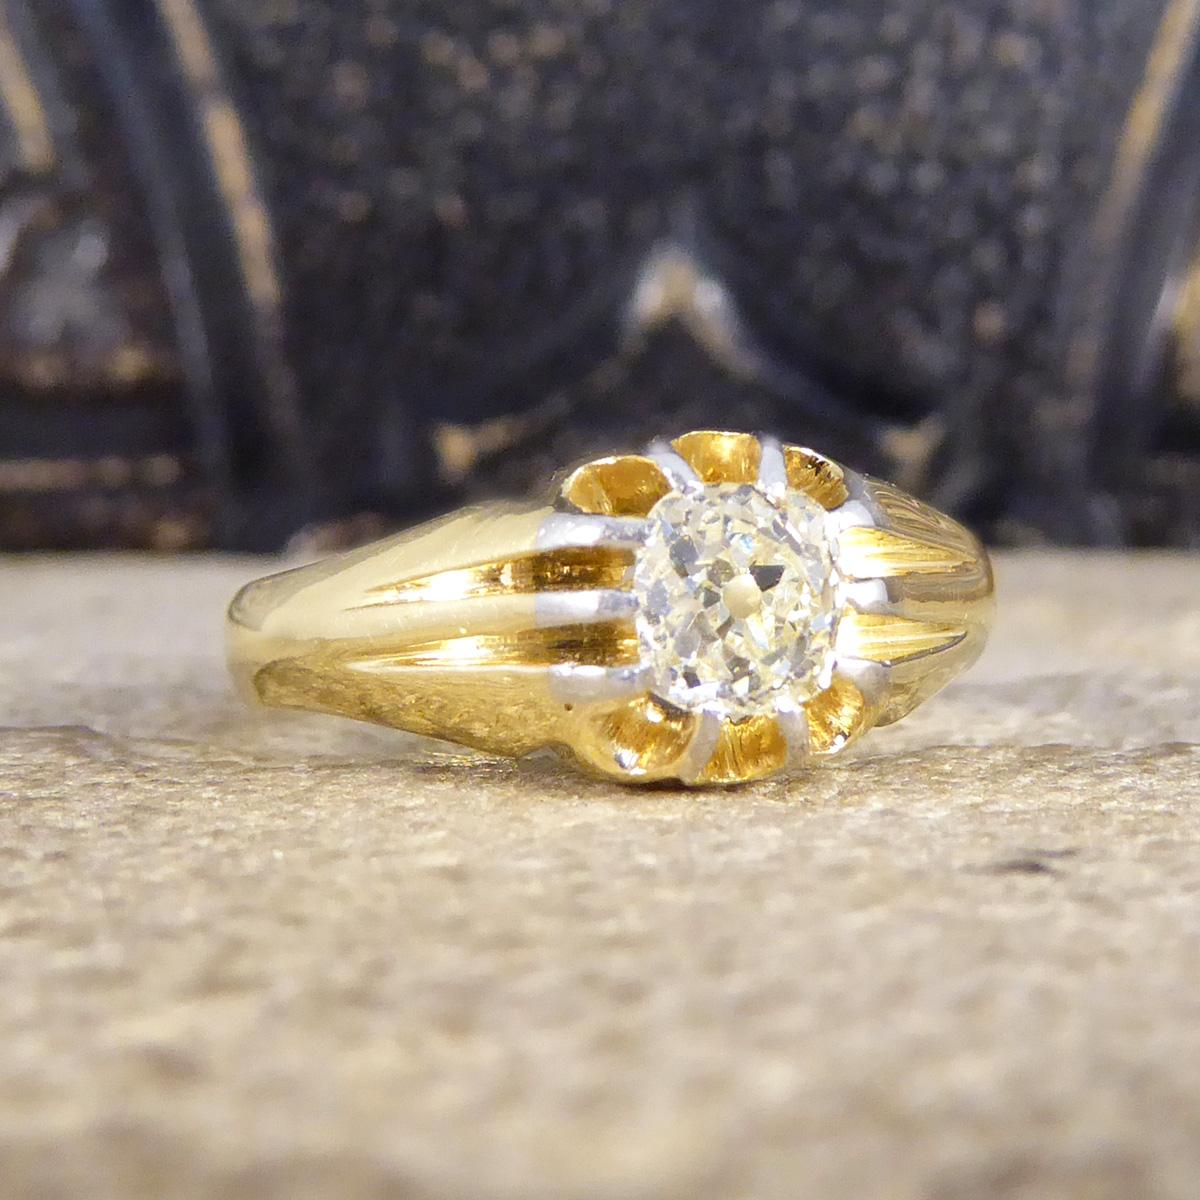 This flush set ring can be worn by men and women alike. Crafted in the Victorian era it was made out of 18ct Yellow Gold with Platinum tips holding the Diamond into place. Centred with a slightly tinted yet bright and clear Old Cushion Cut Diamond